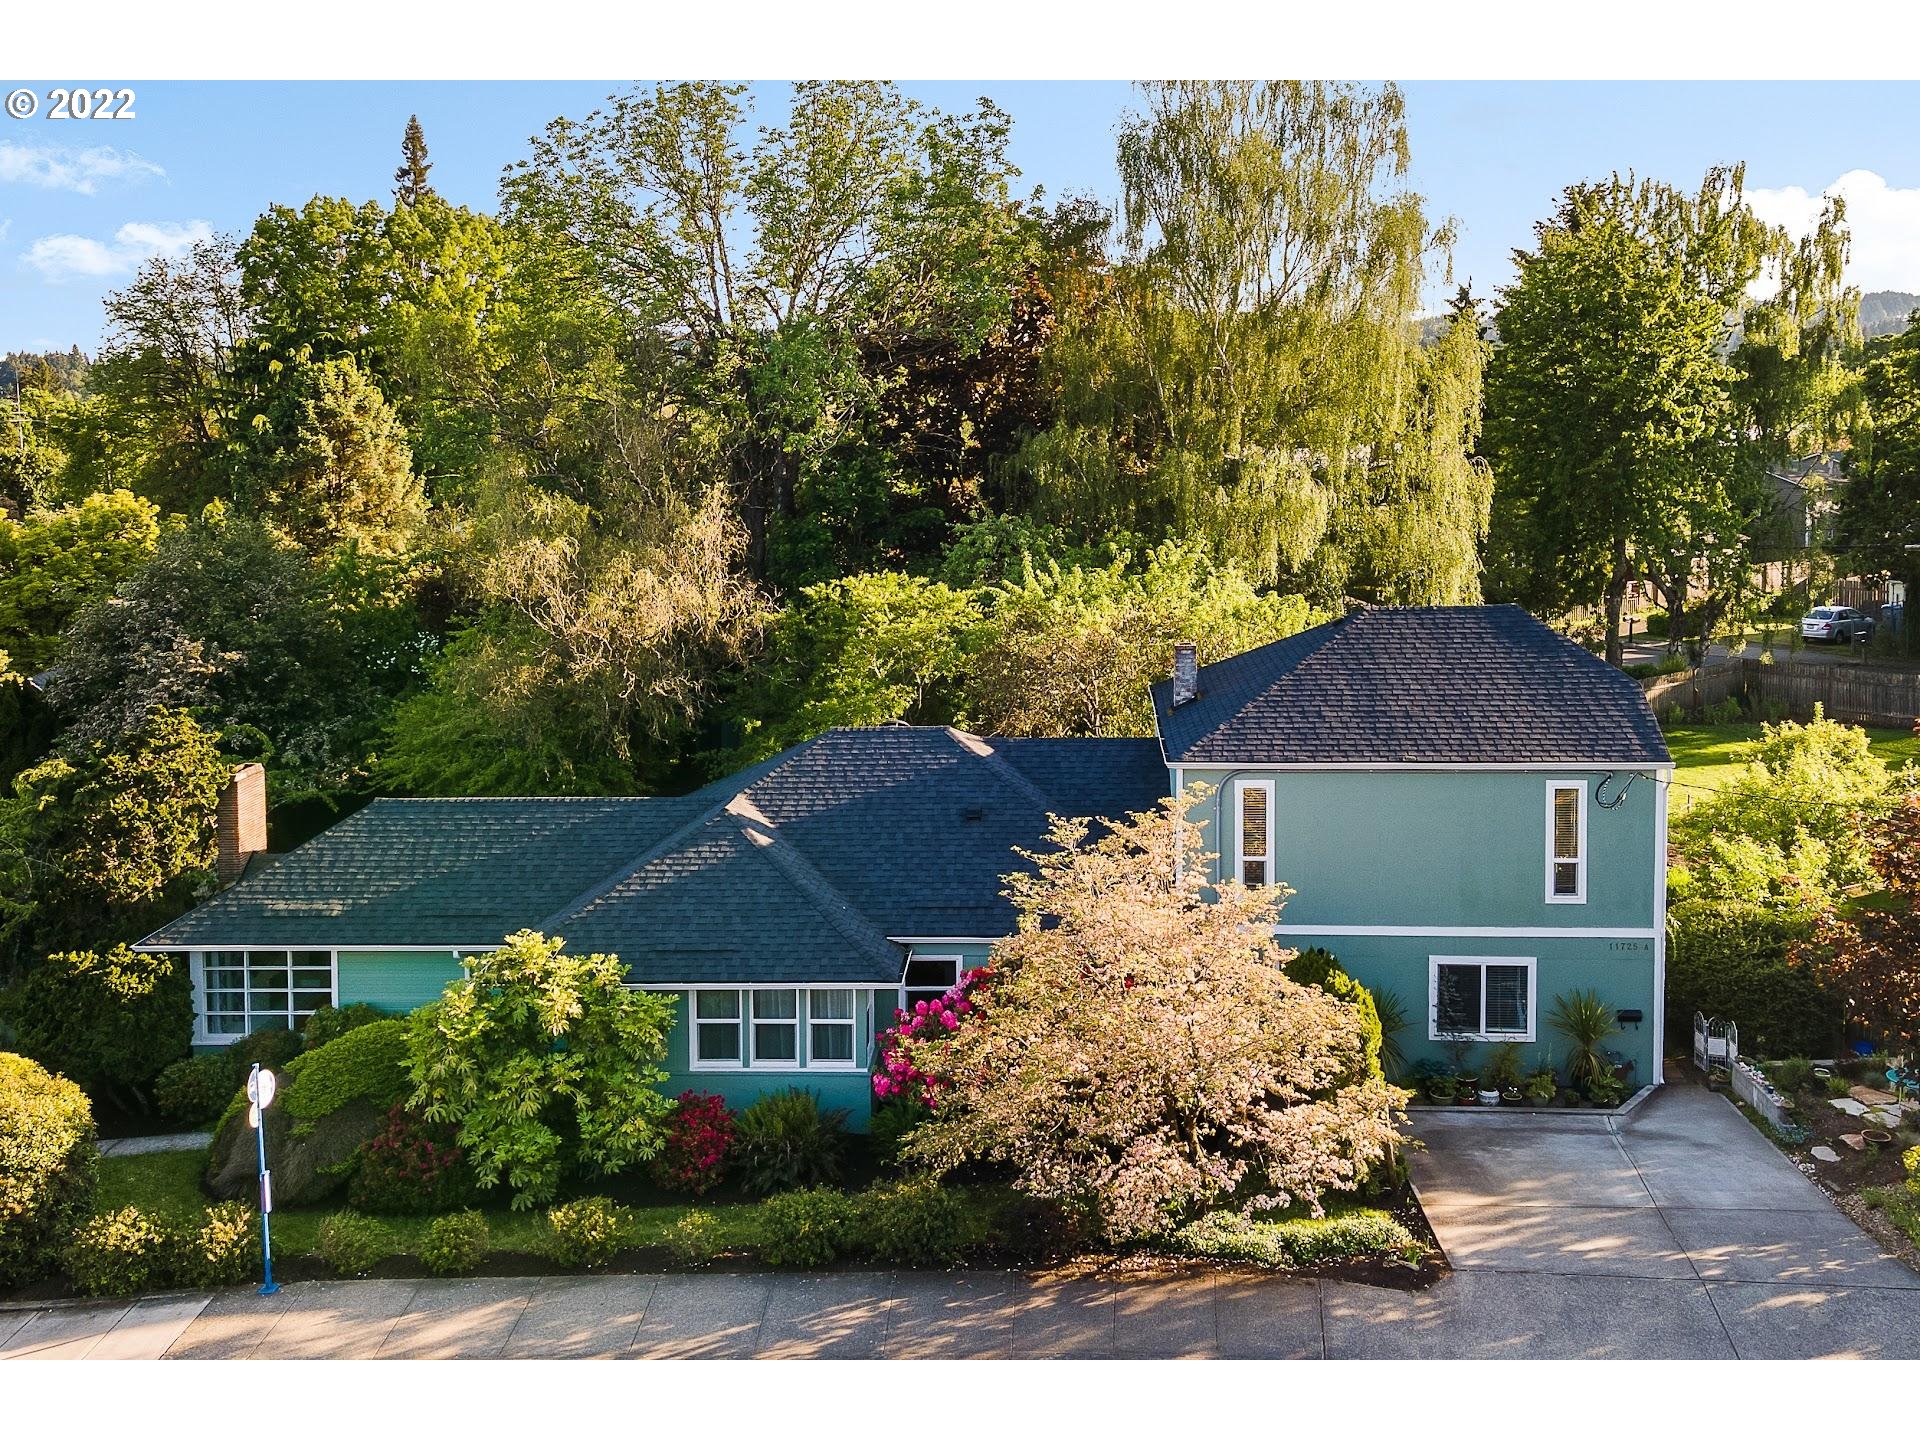 Just Sold: Beautiful Tigard Home with ADU